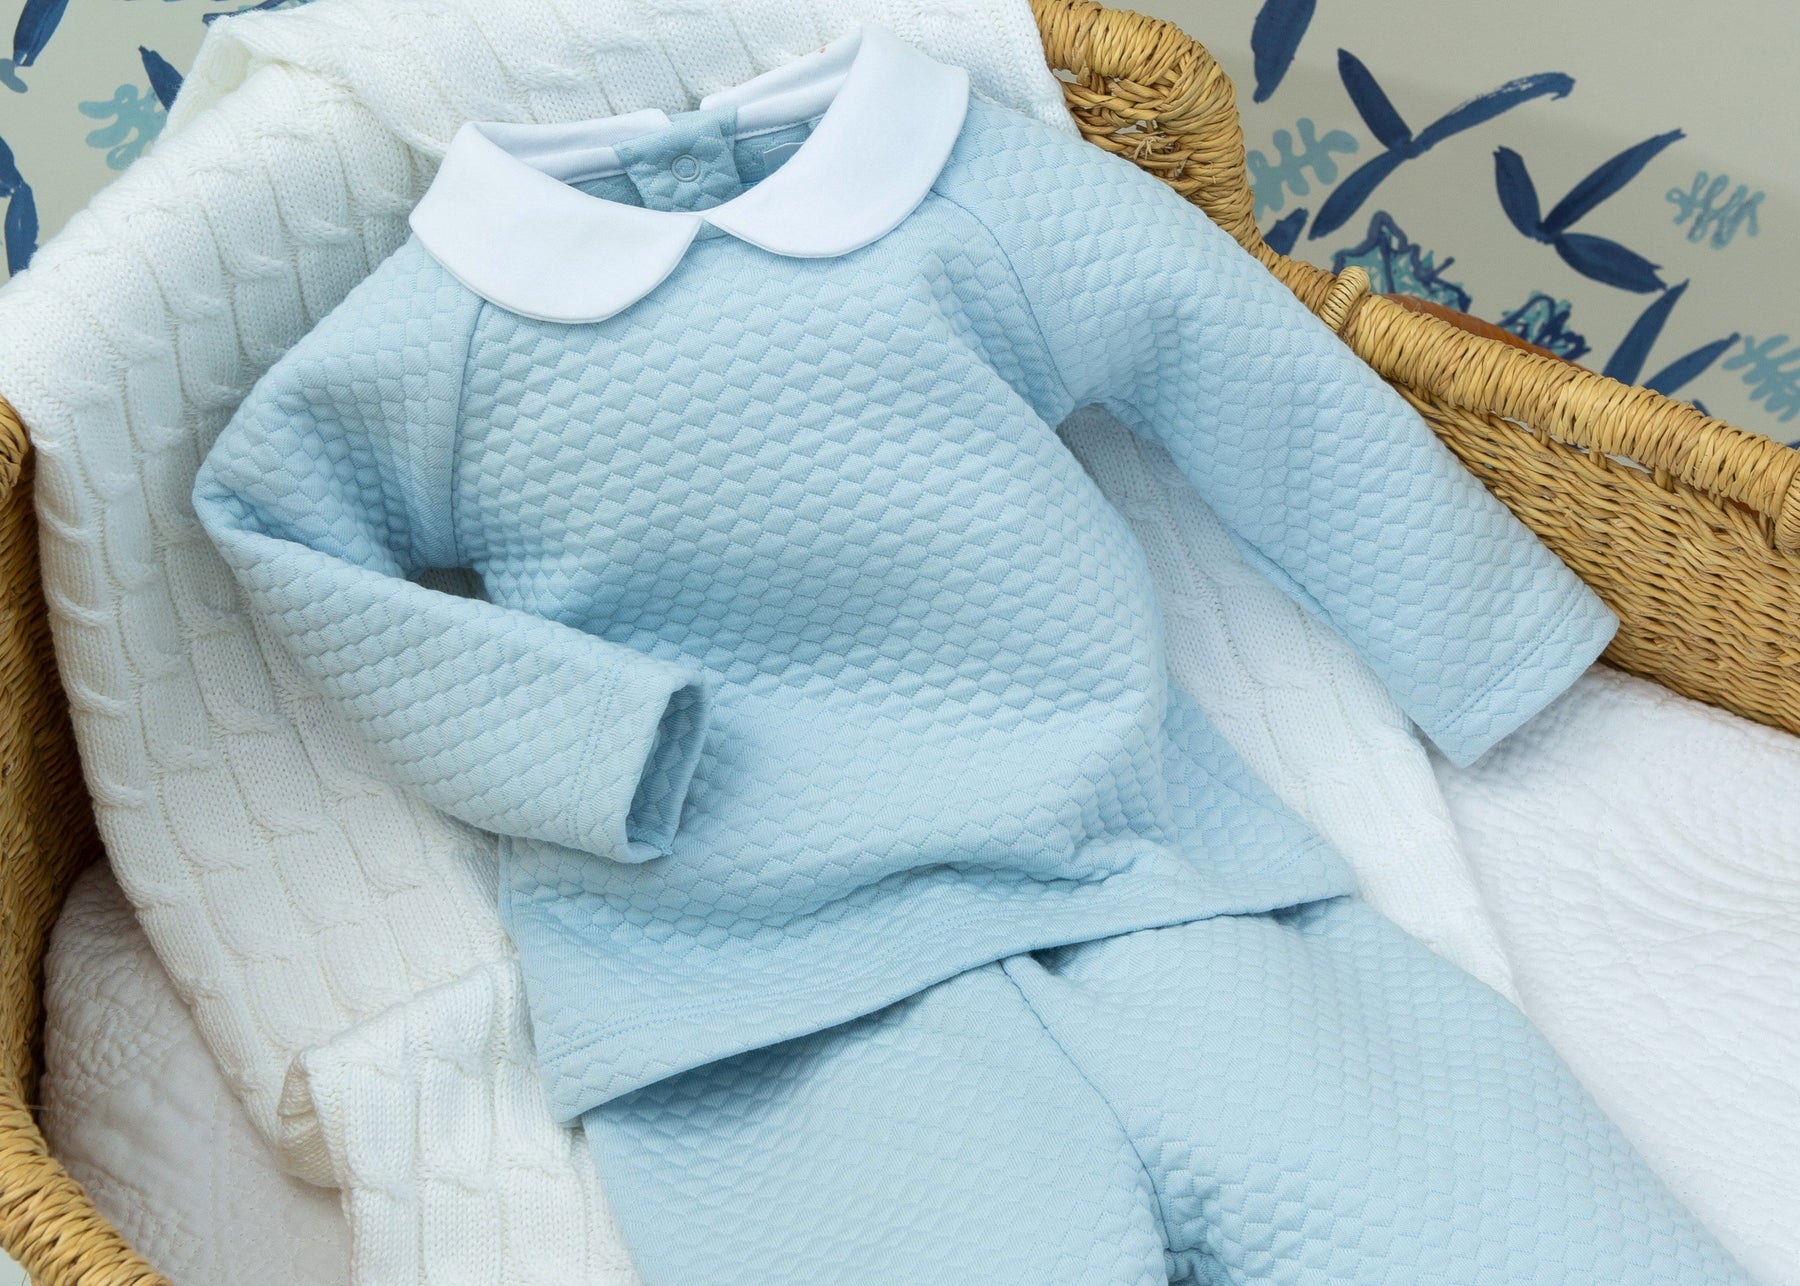 seguridadindustrialcr traditional baby clothing, little boy's quilted sleep set in light blue